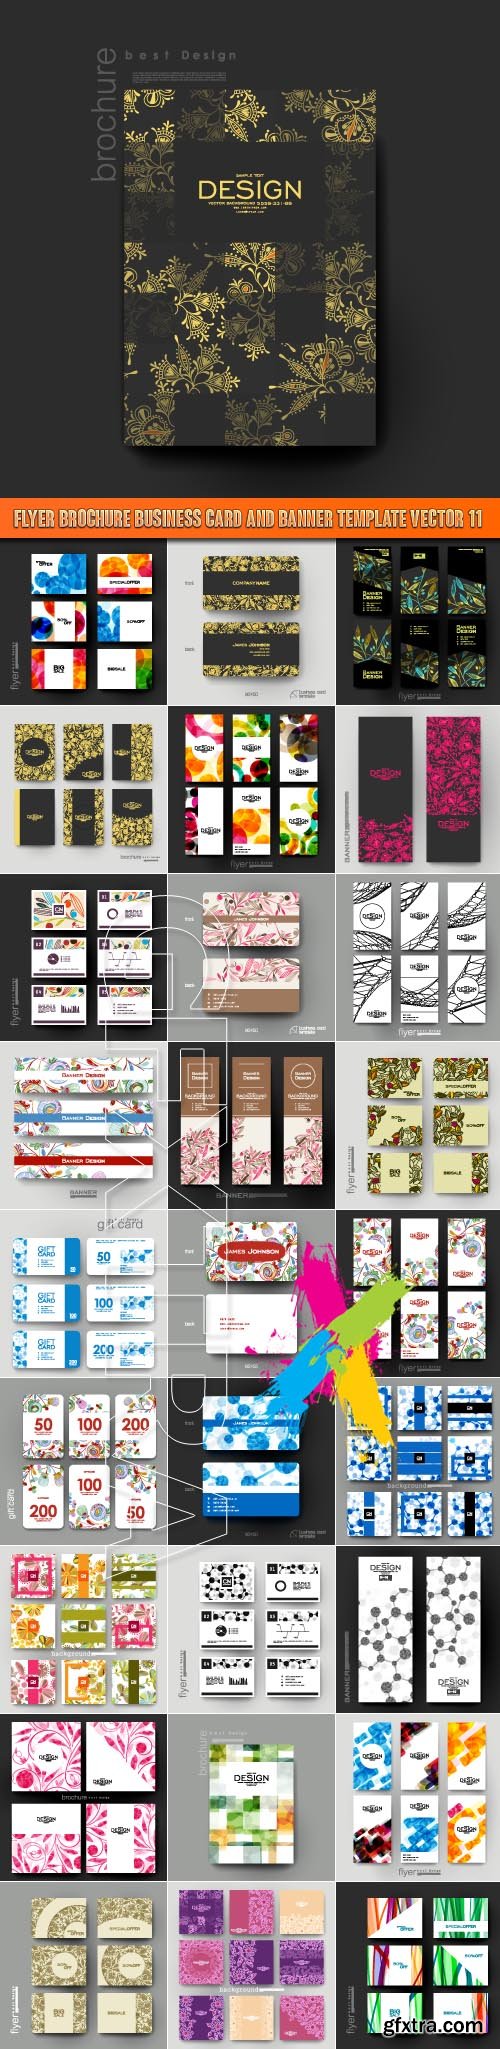 Flyer brochure business card and banner template vector 11